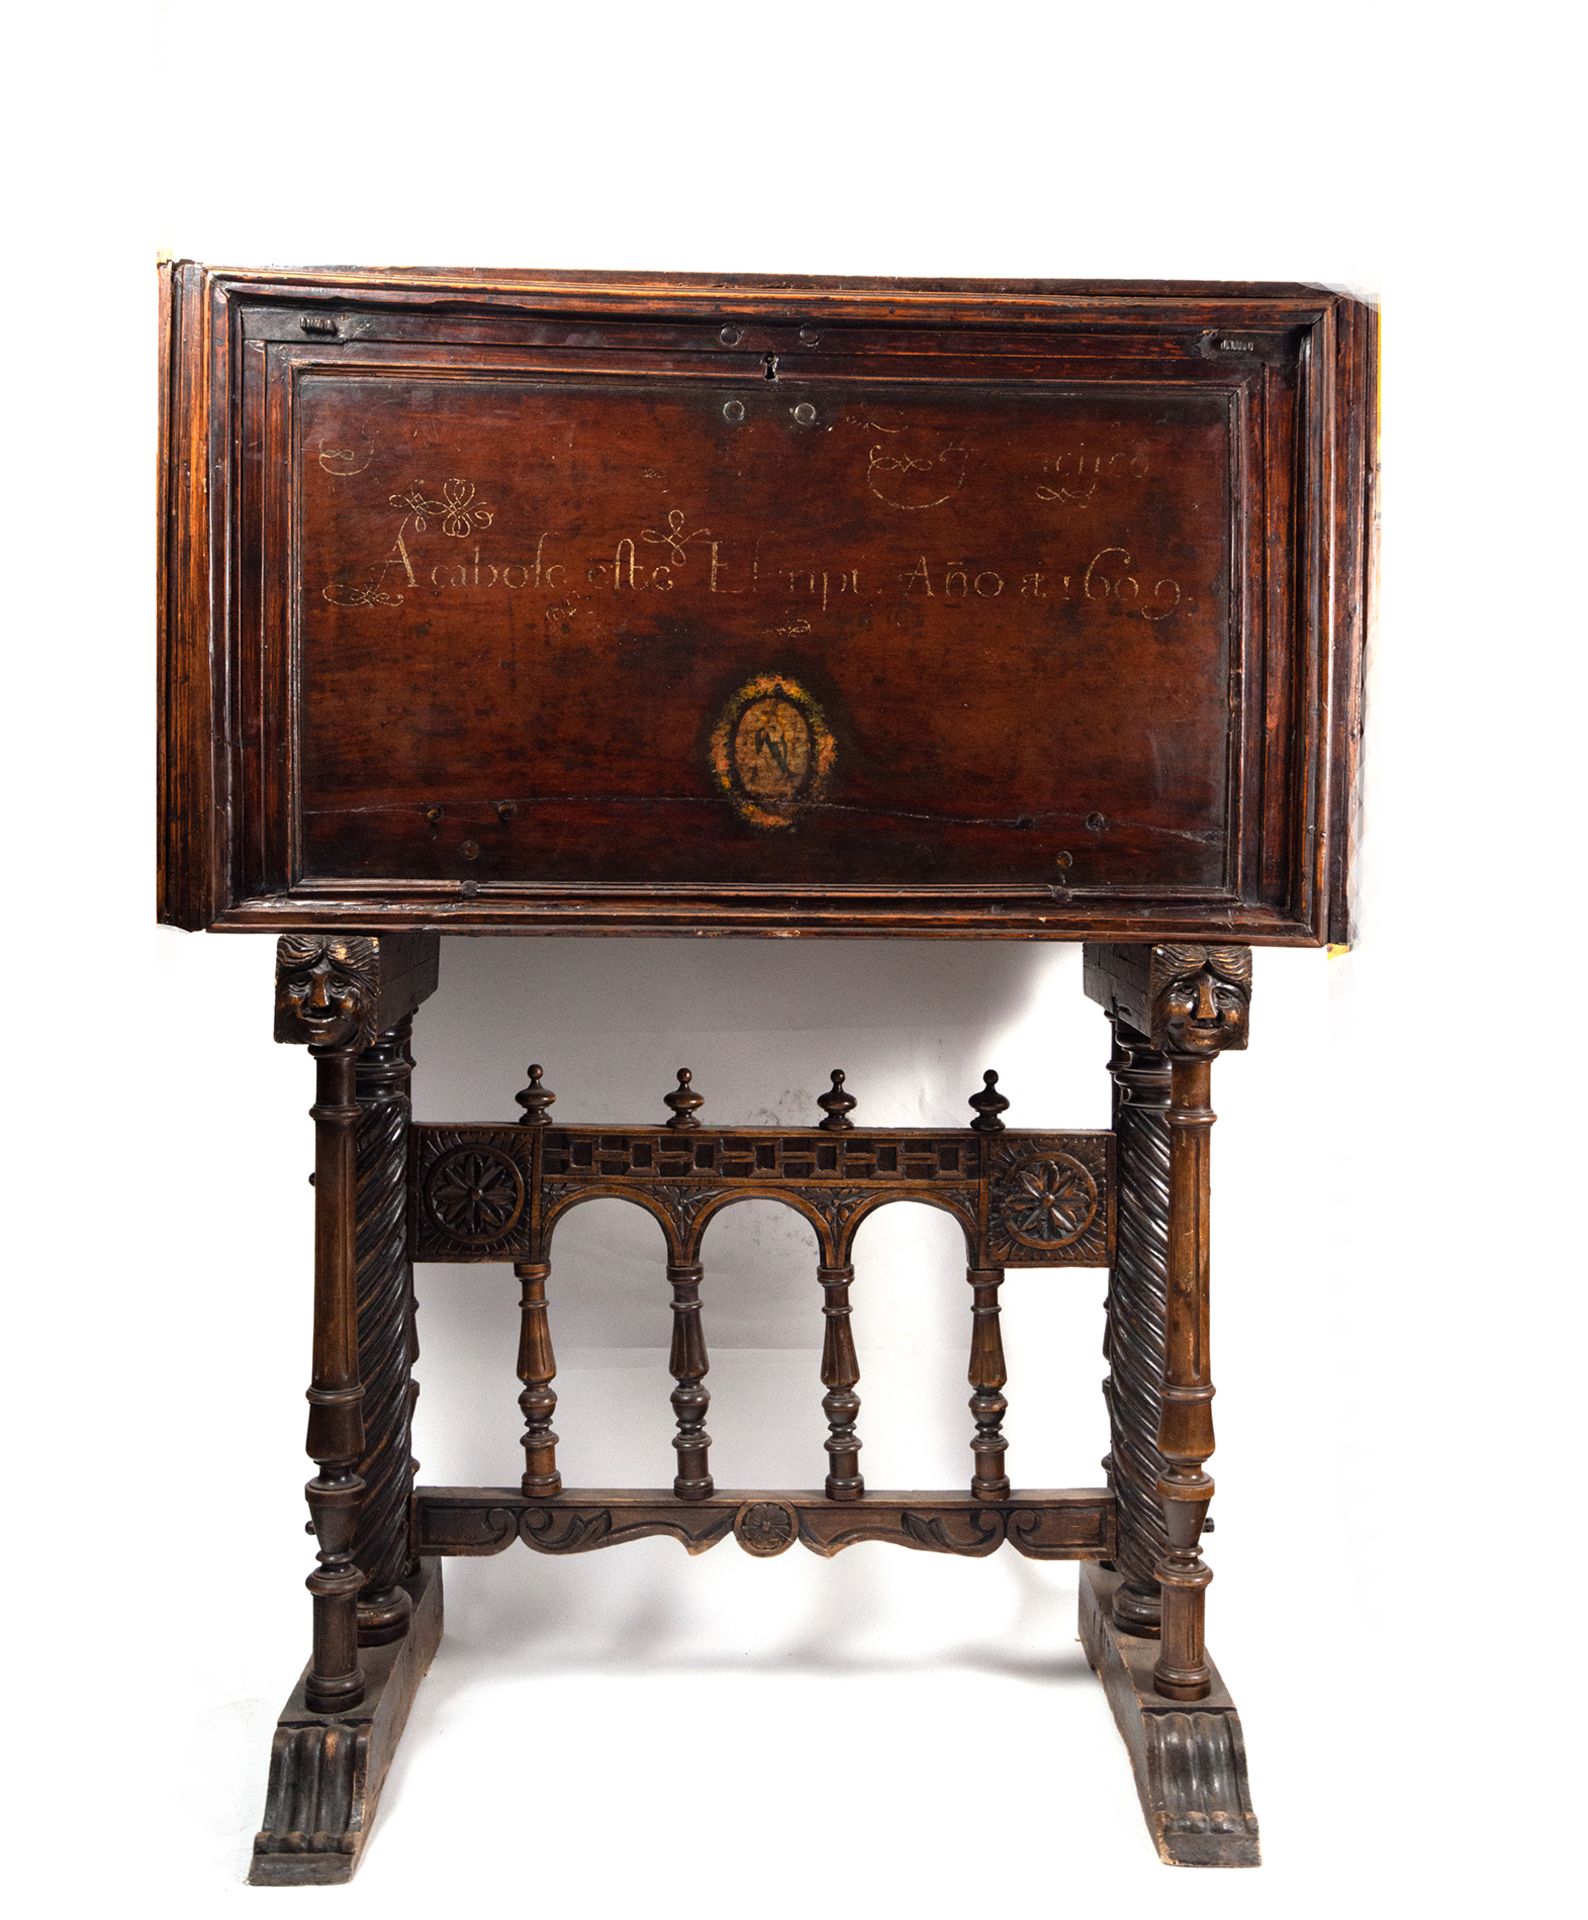 Important Plateresque Cabinet in Walnut, Boxwood and Ebony inlay, late 16th century